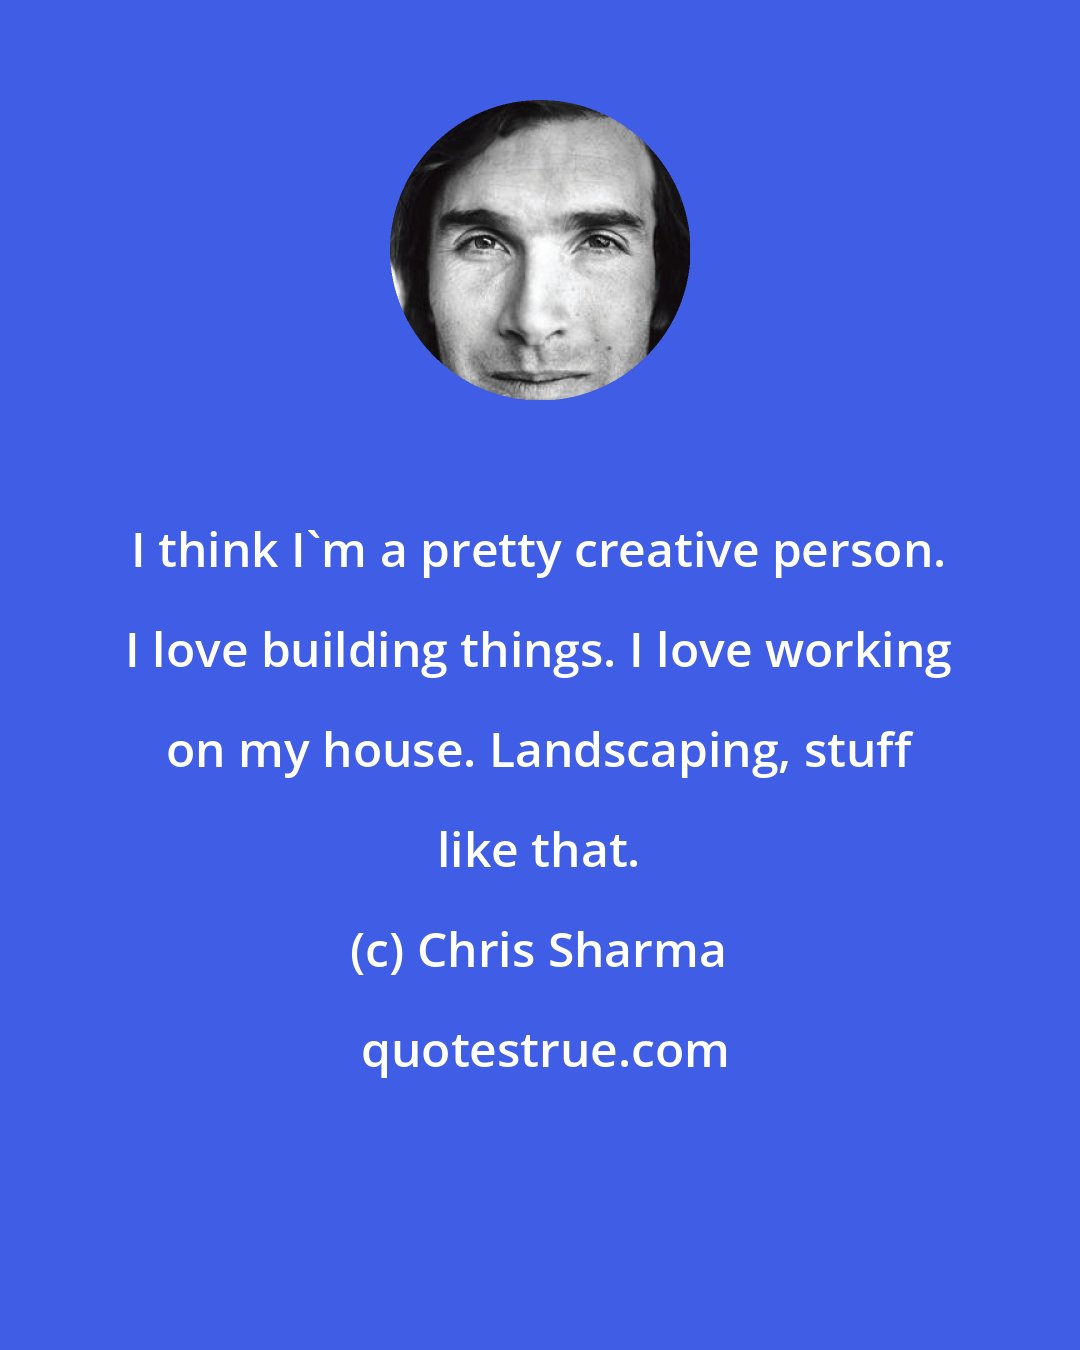 Chris Sharma: I think I'm a pretty creative person. I love building things. I love working on my house. Landscaping, stuff like that.